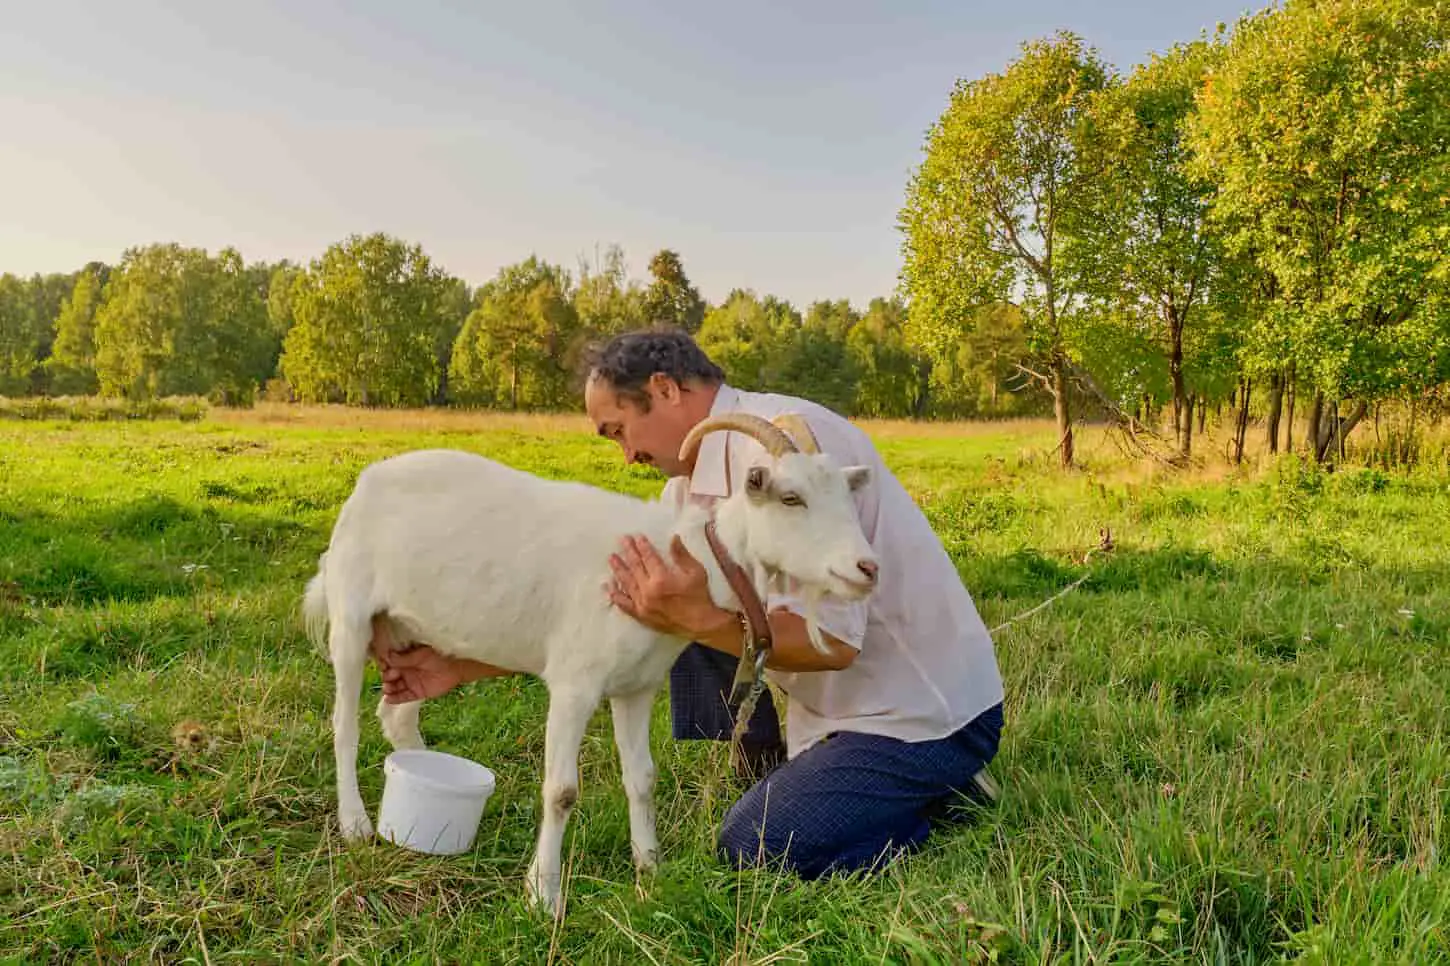 Can Goats Produce Milk Without Being Pregnant?